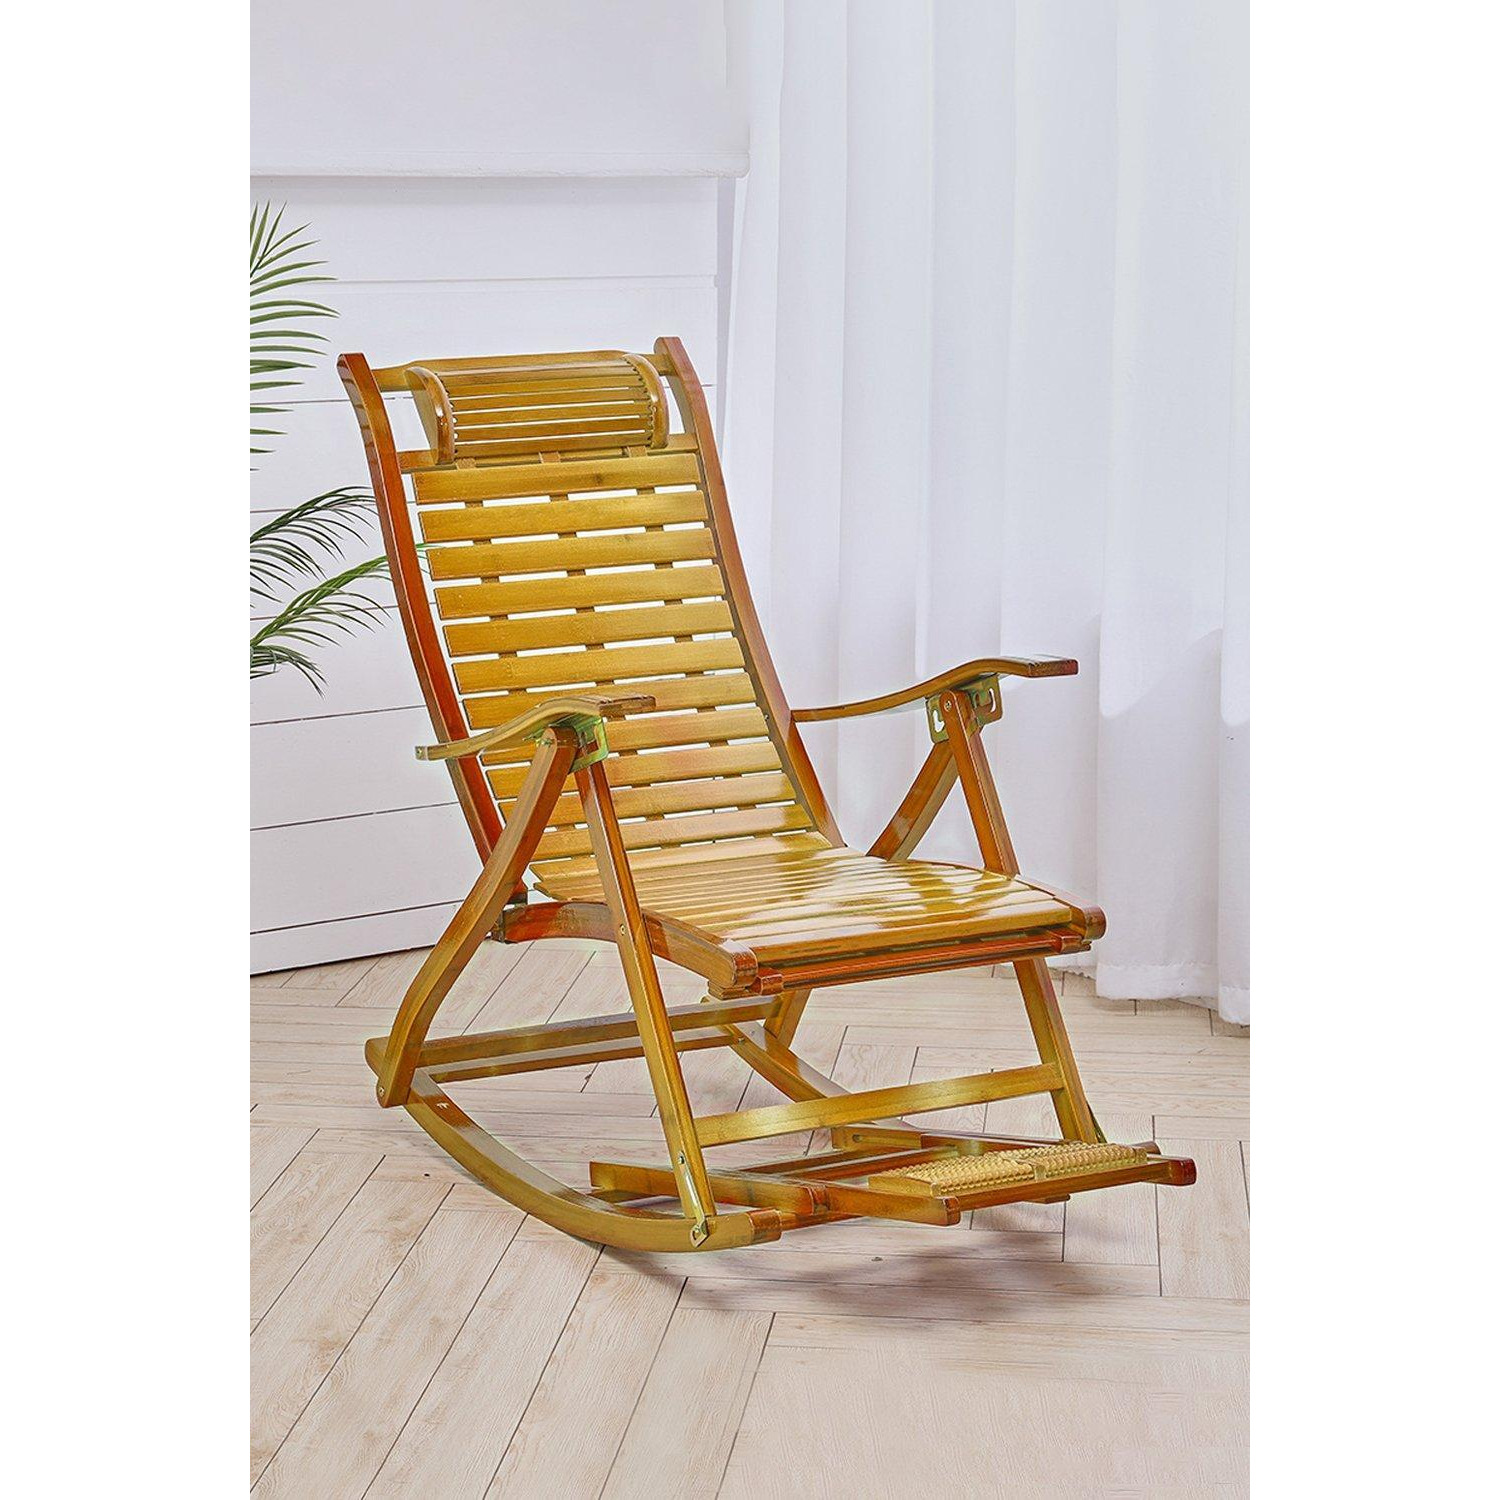 Bamboo Rocking Chair Foldable Recliner - image 1